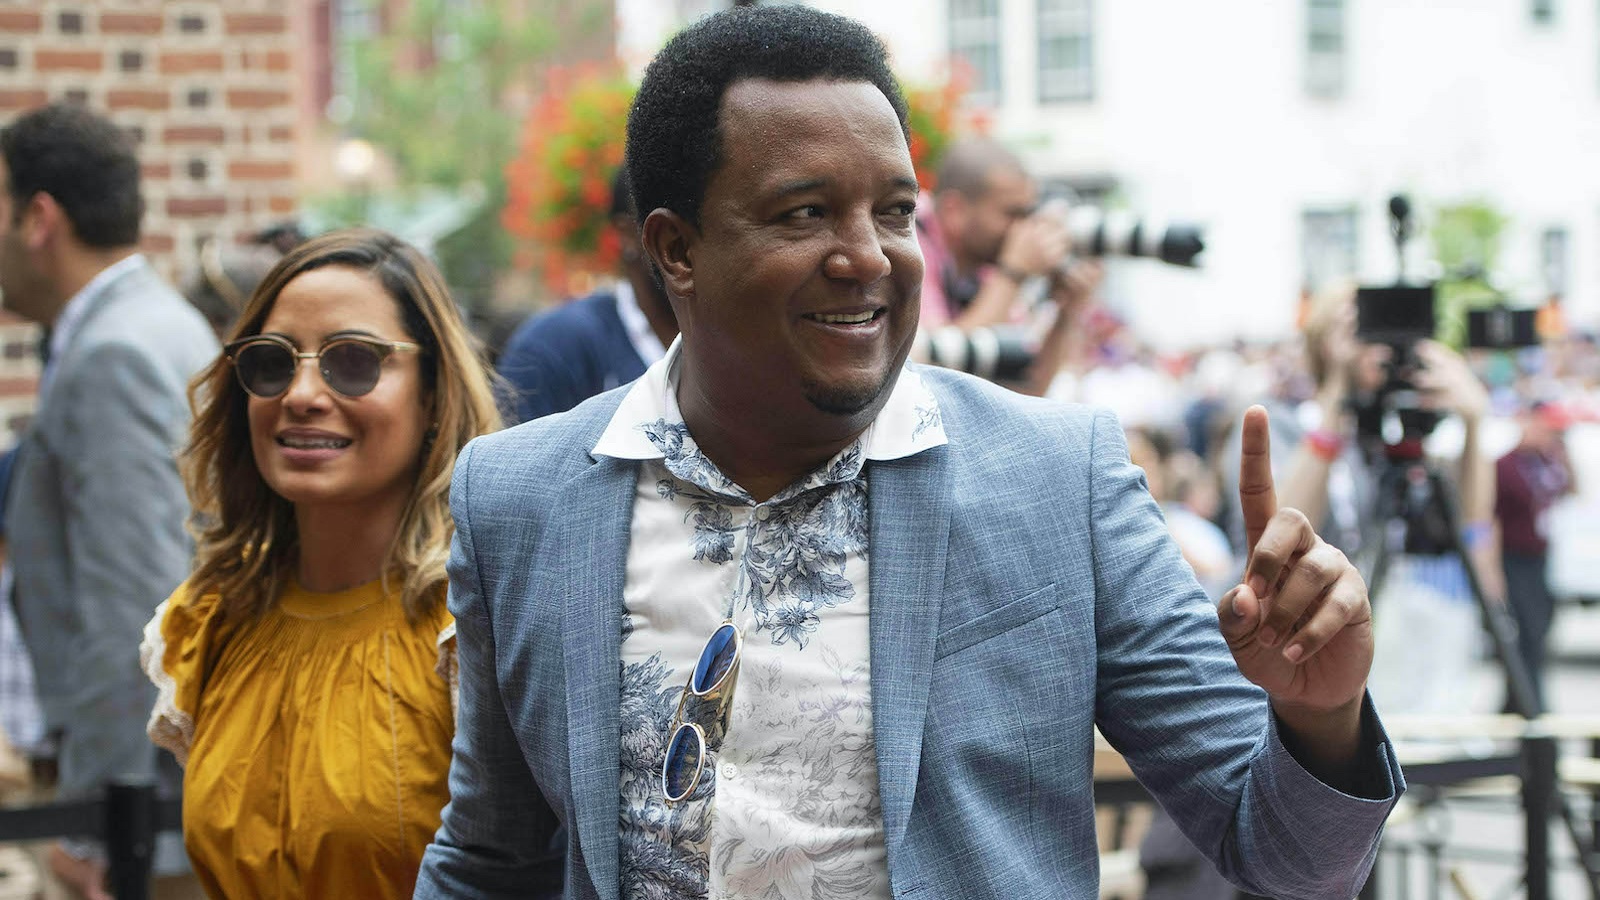 Red Sox Hall of Famer Pedro Martinez compares the New York Yankees